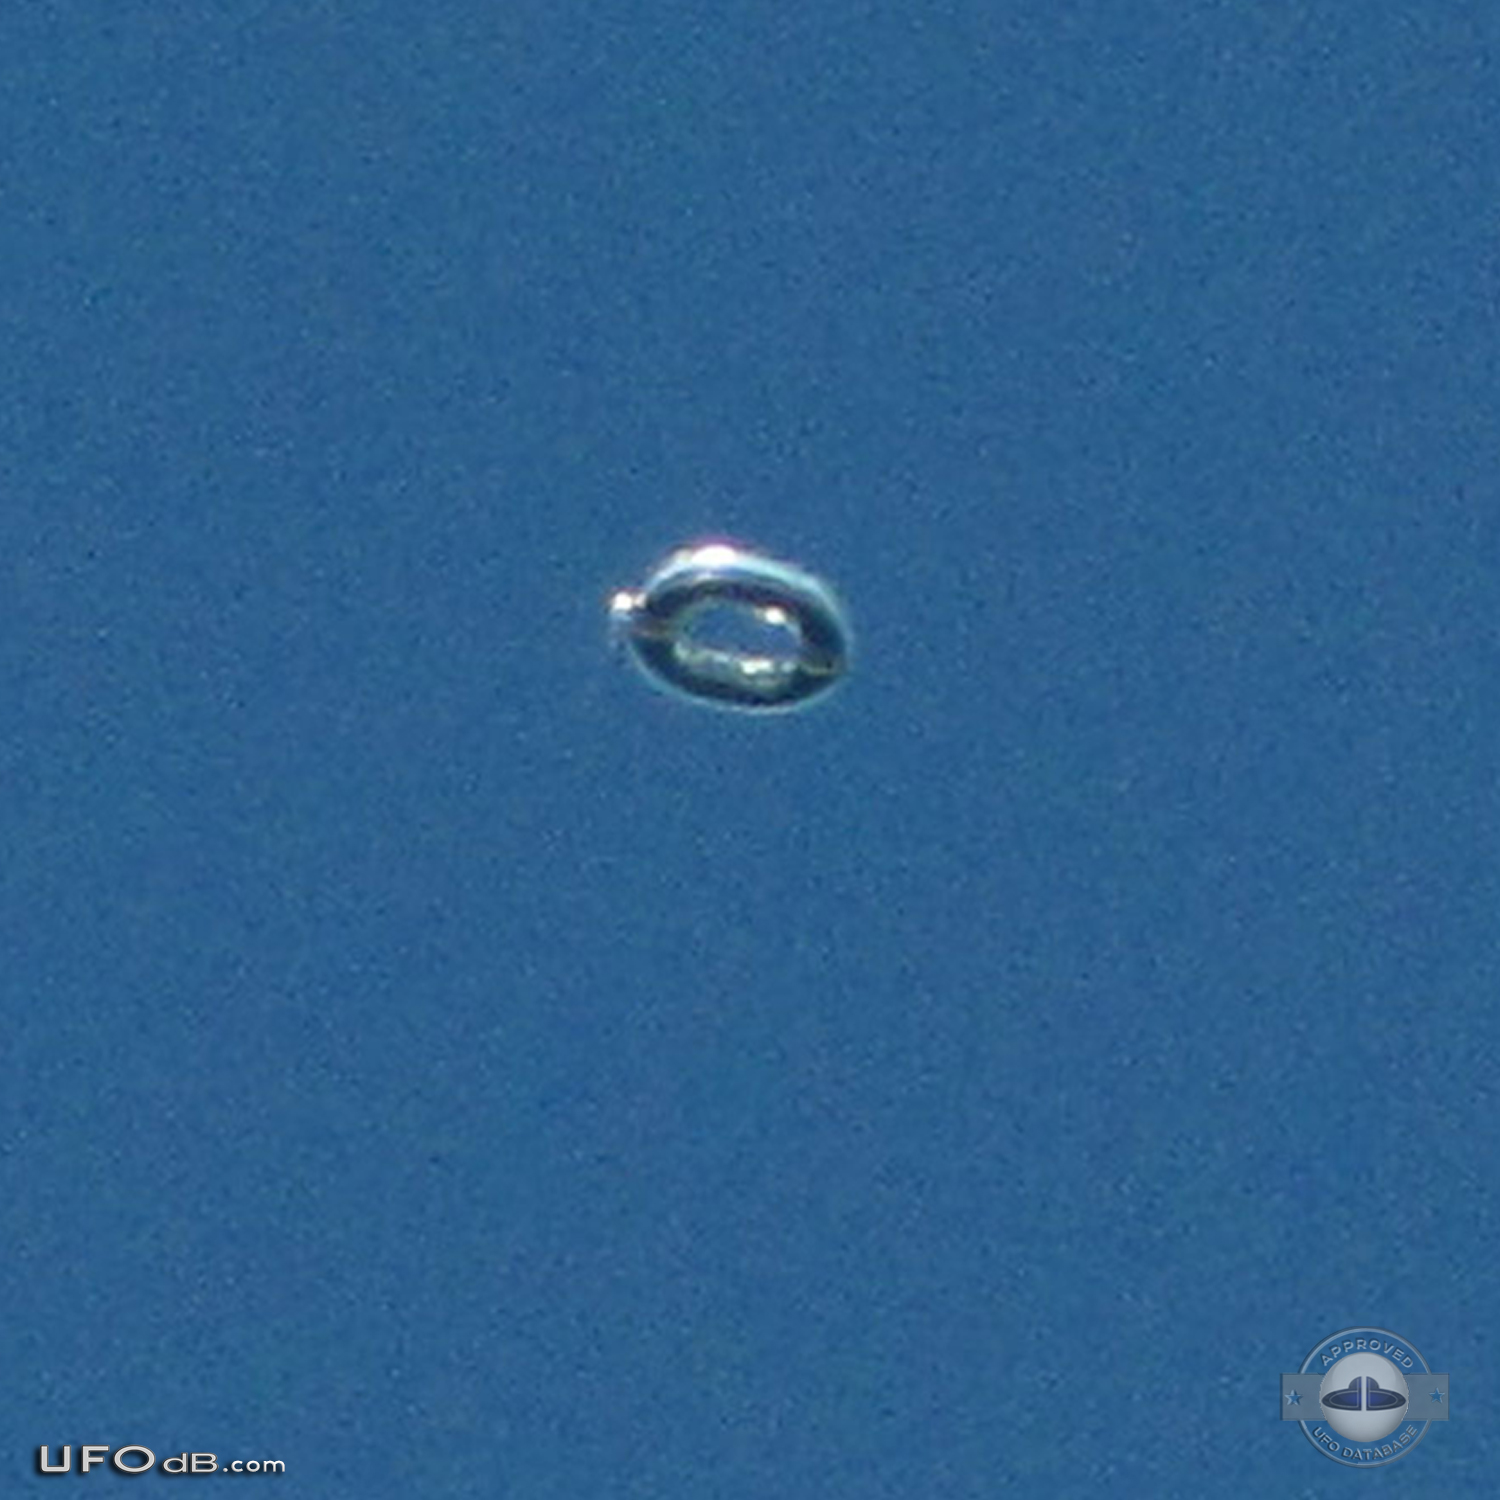 Donut shaped UFO with glowing silver material over Scituate Ma US 2012 UFO Picture #481-2